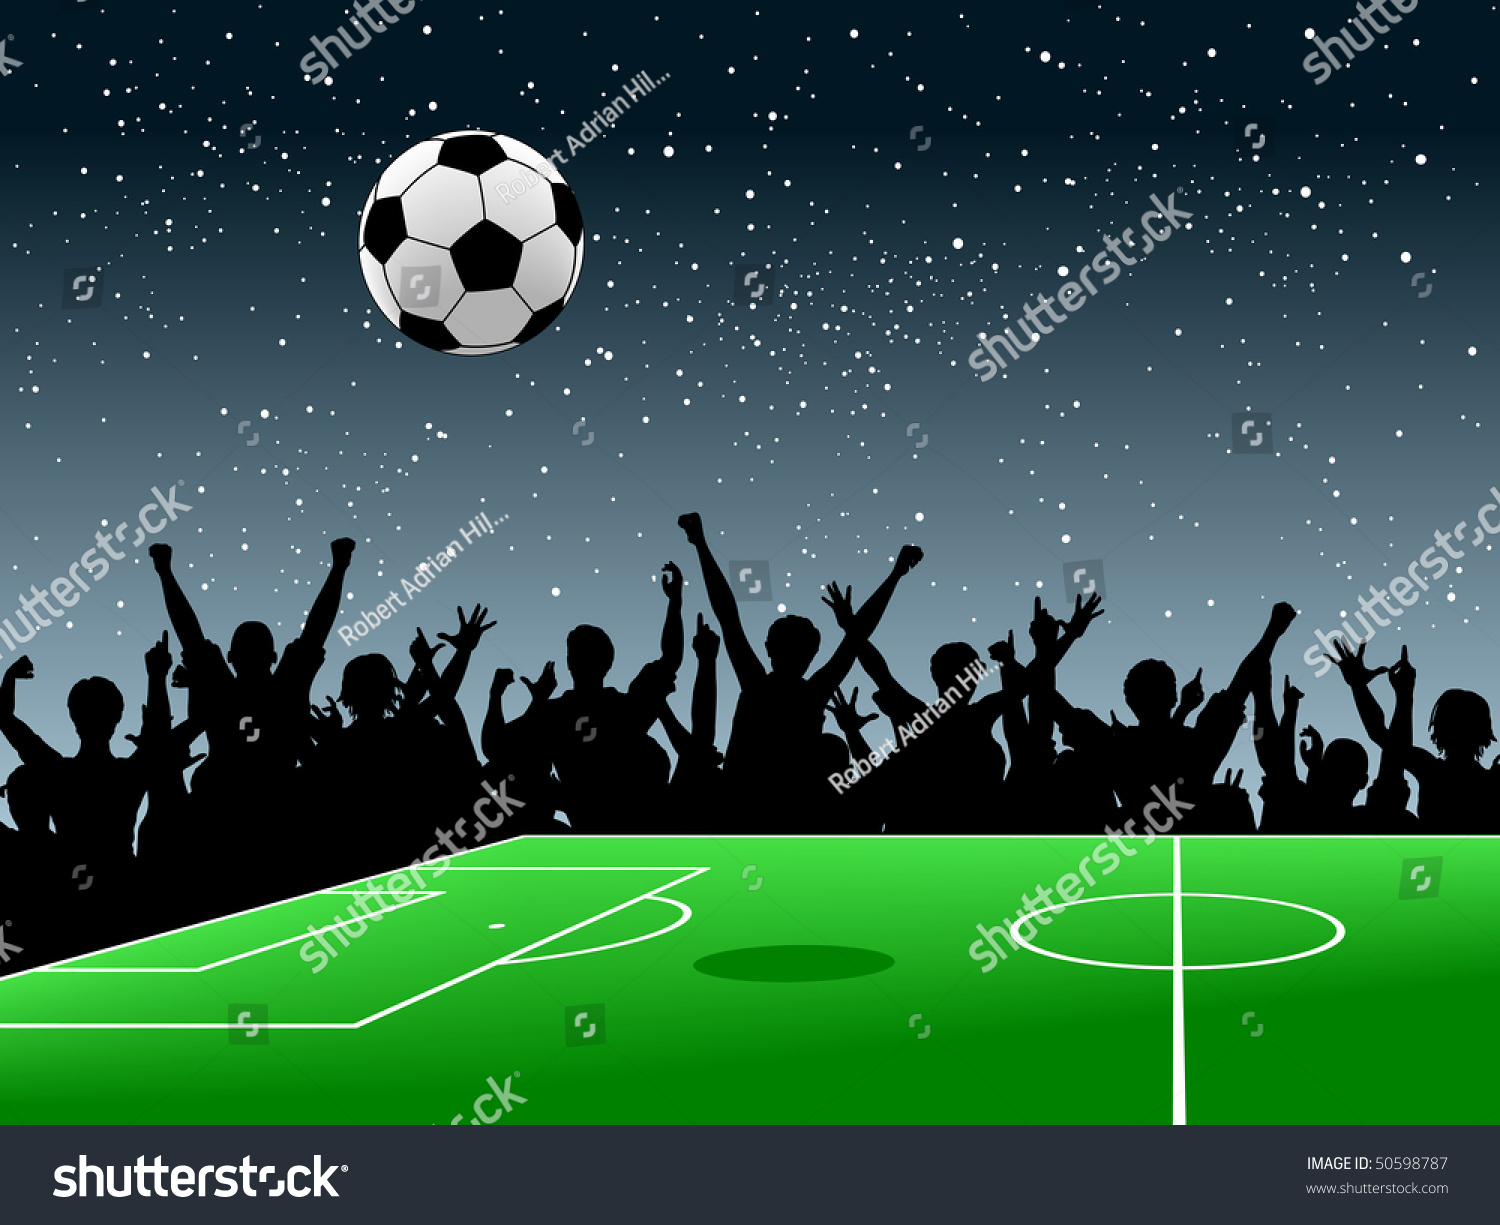 Design of a crowd around a football pitch at night #50598787